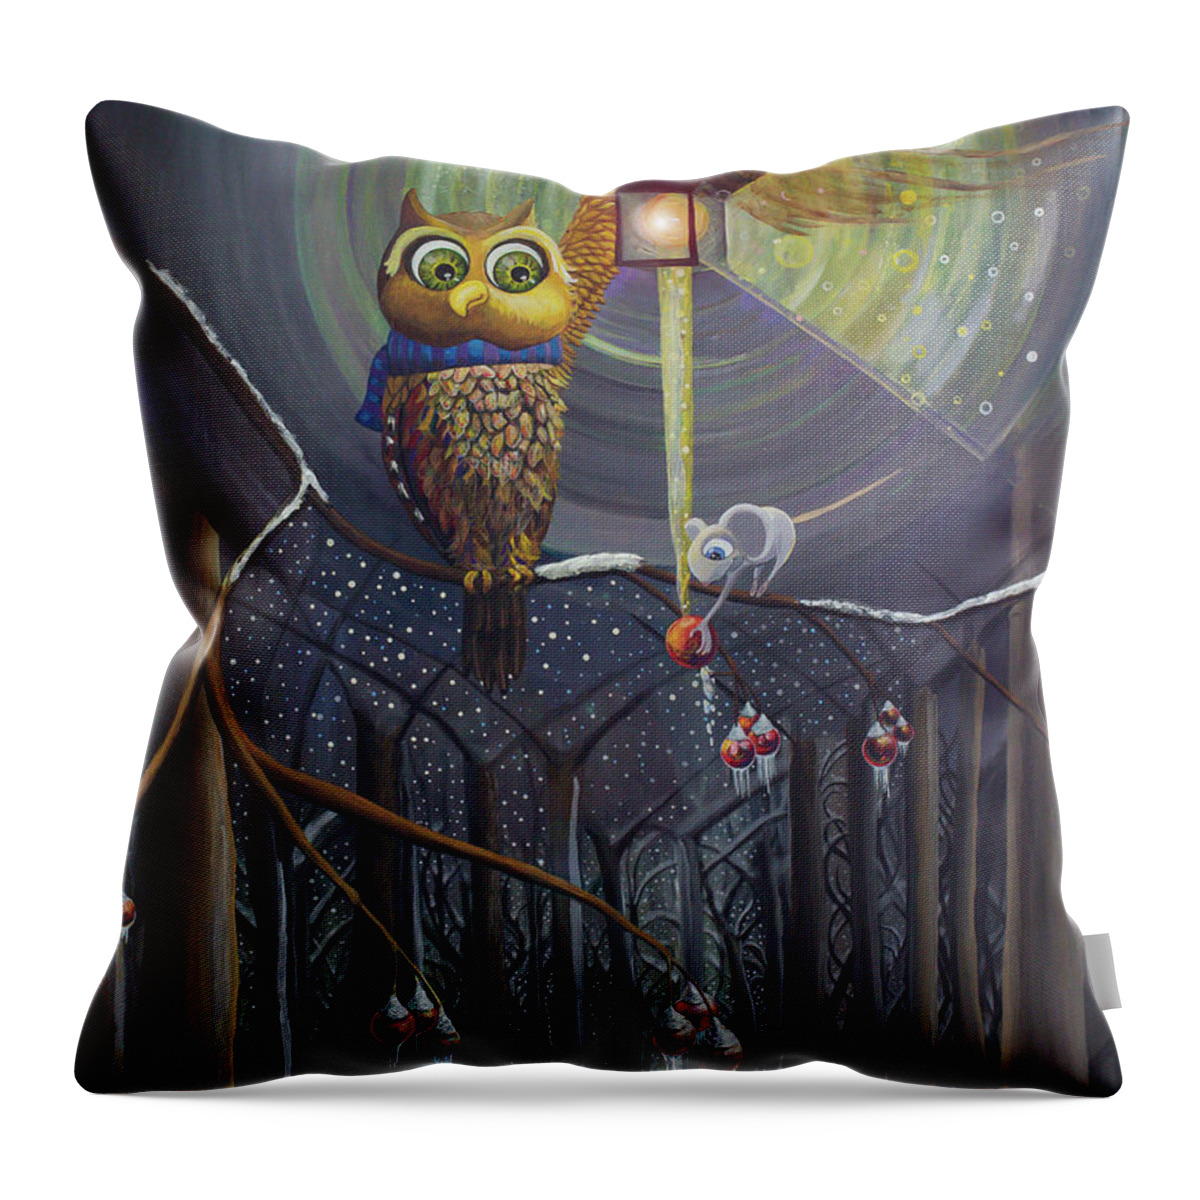  Throw Pillow featuring the painting Lighting the Way by Mindy Huntress